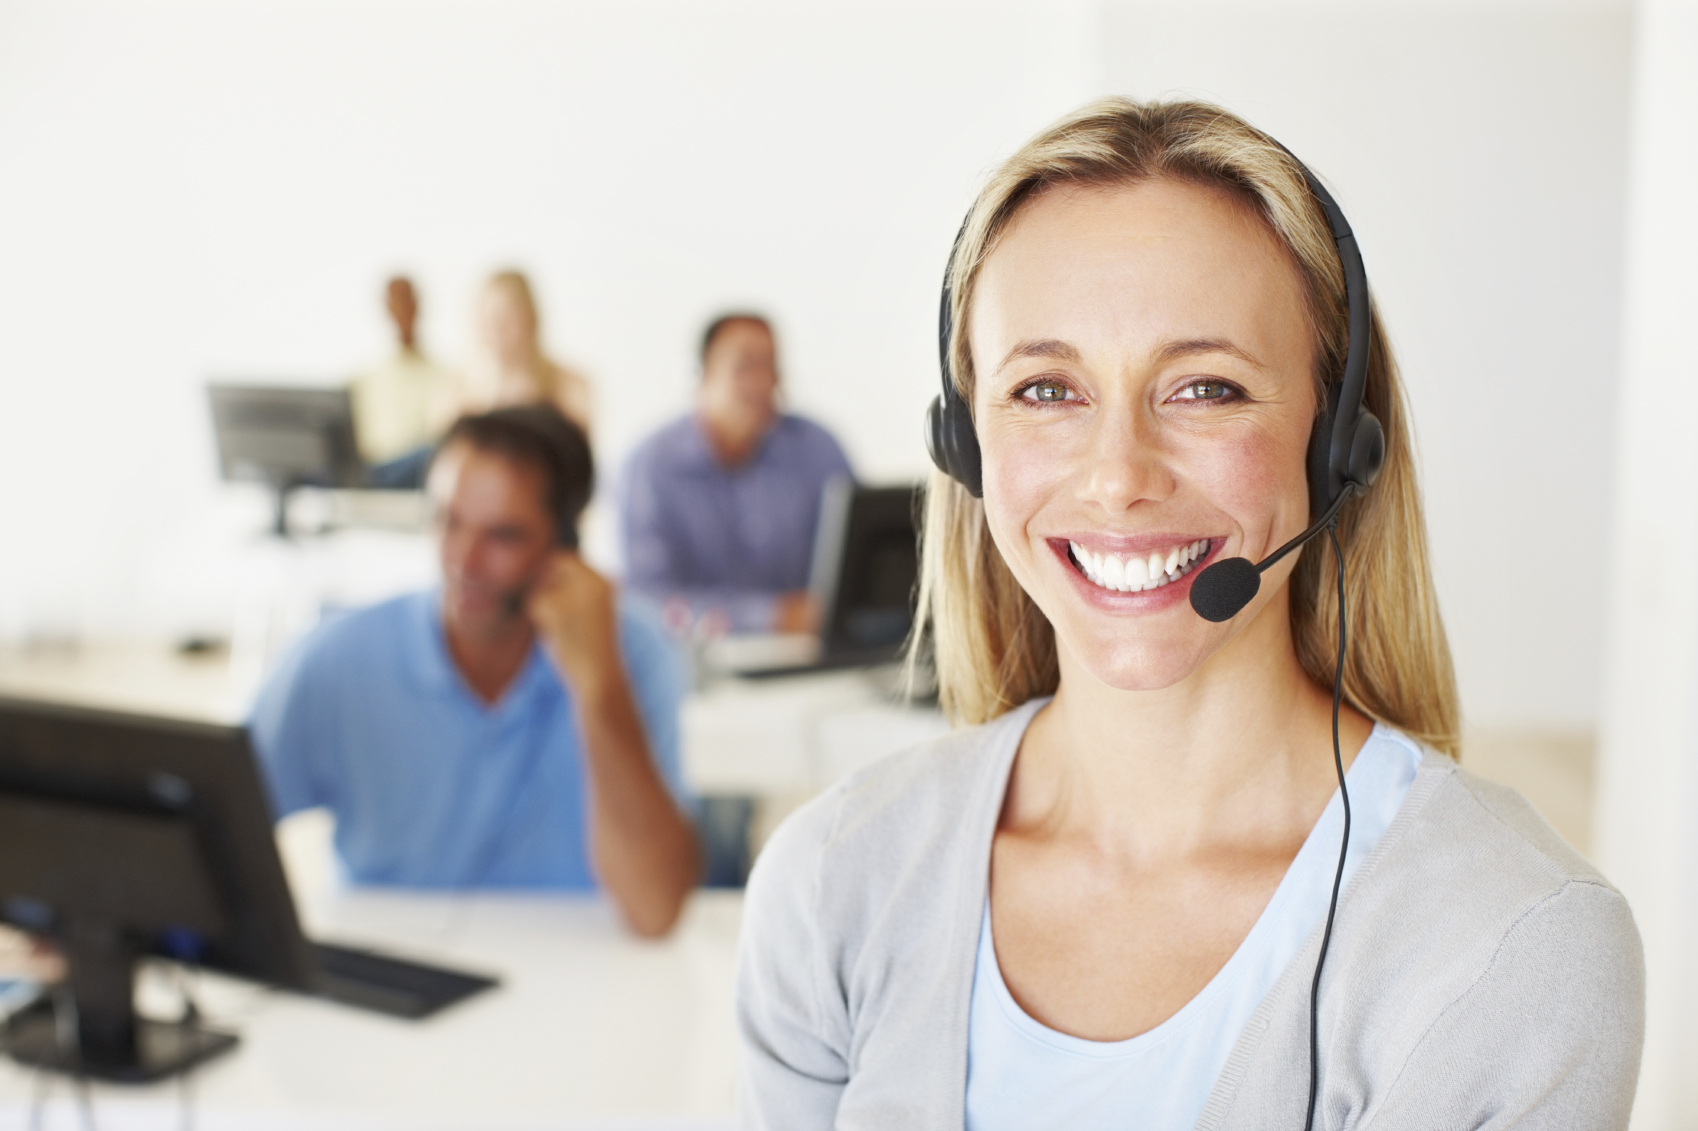 An image of a call center agent smiling with her headset on. There are also various team members behind her taking calls at their desks.